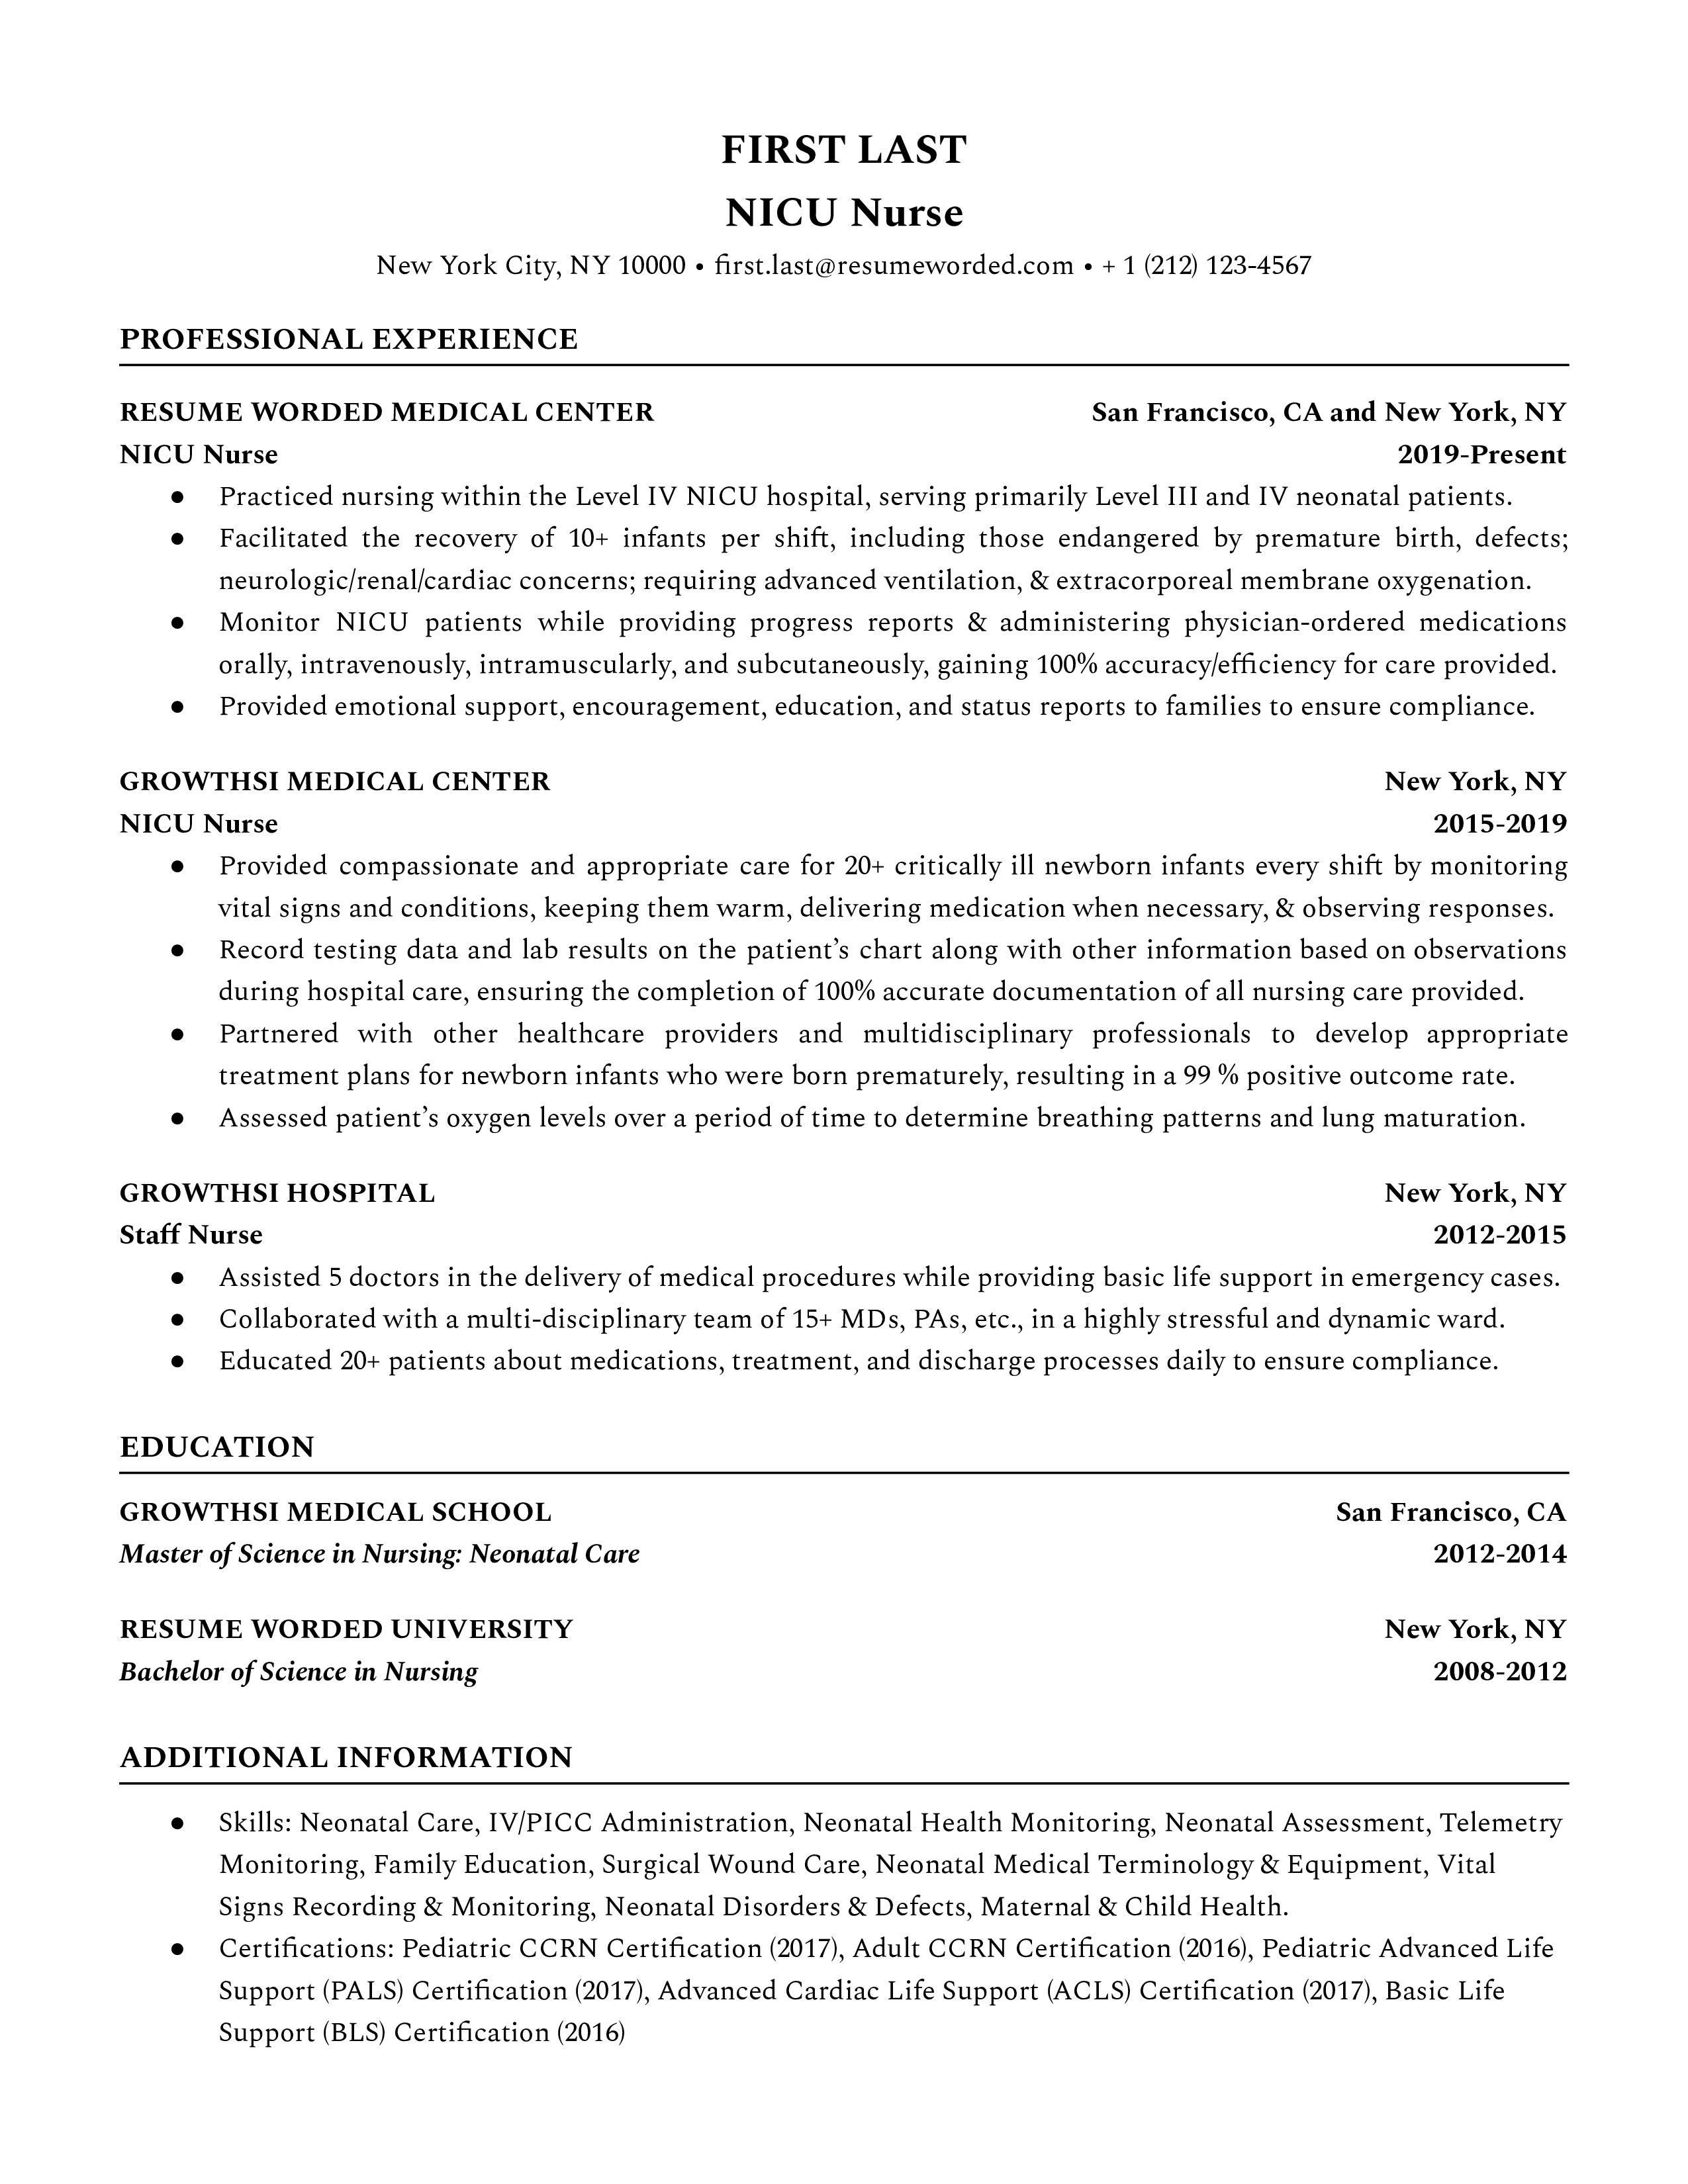 A well-structured NICU nurse CV showcasing specialized skills and teamwork experience.